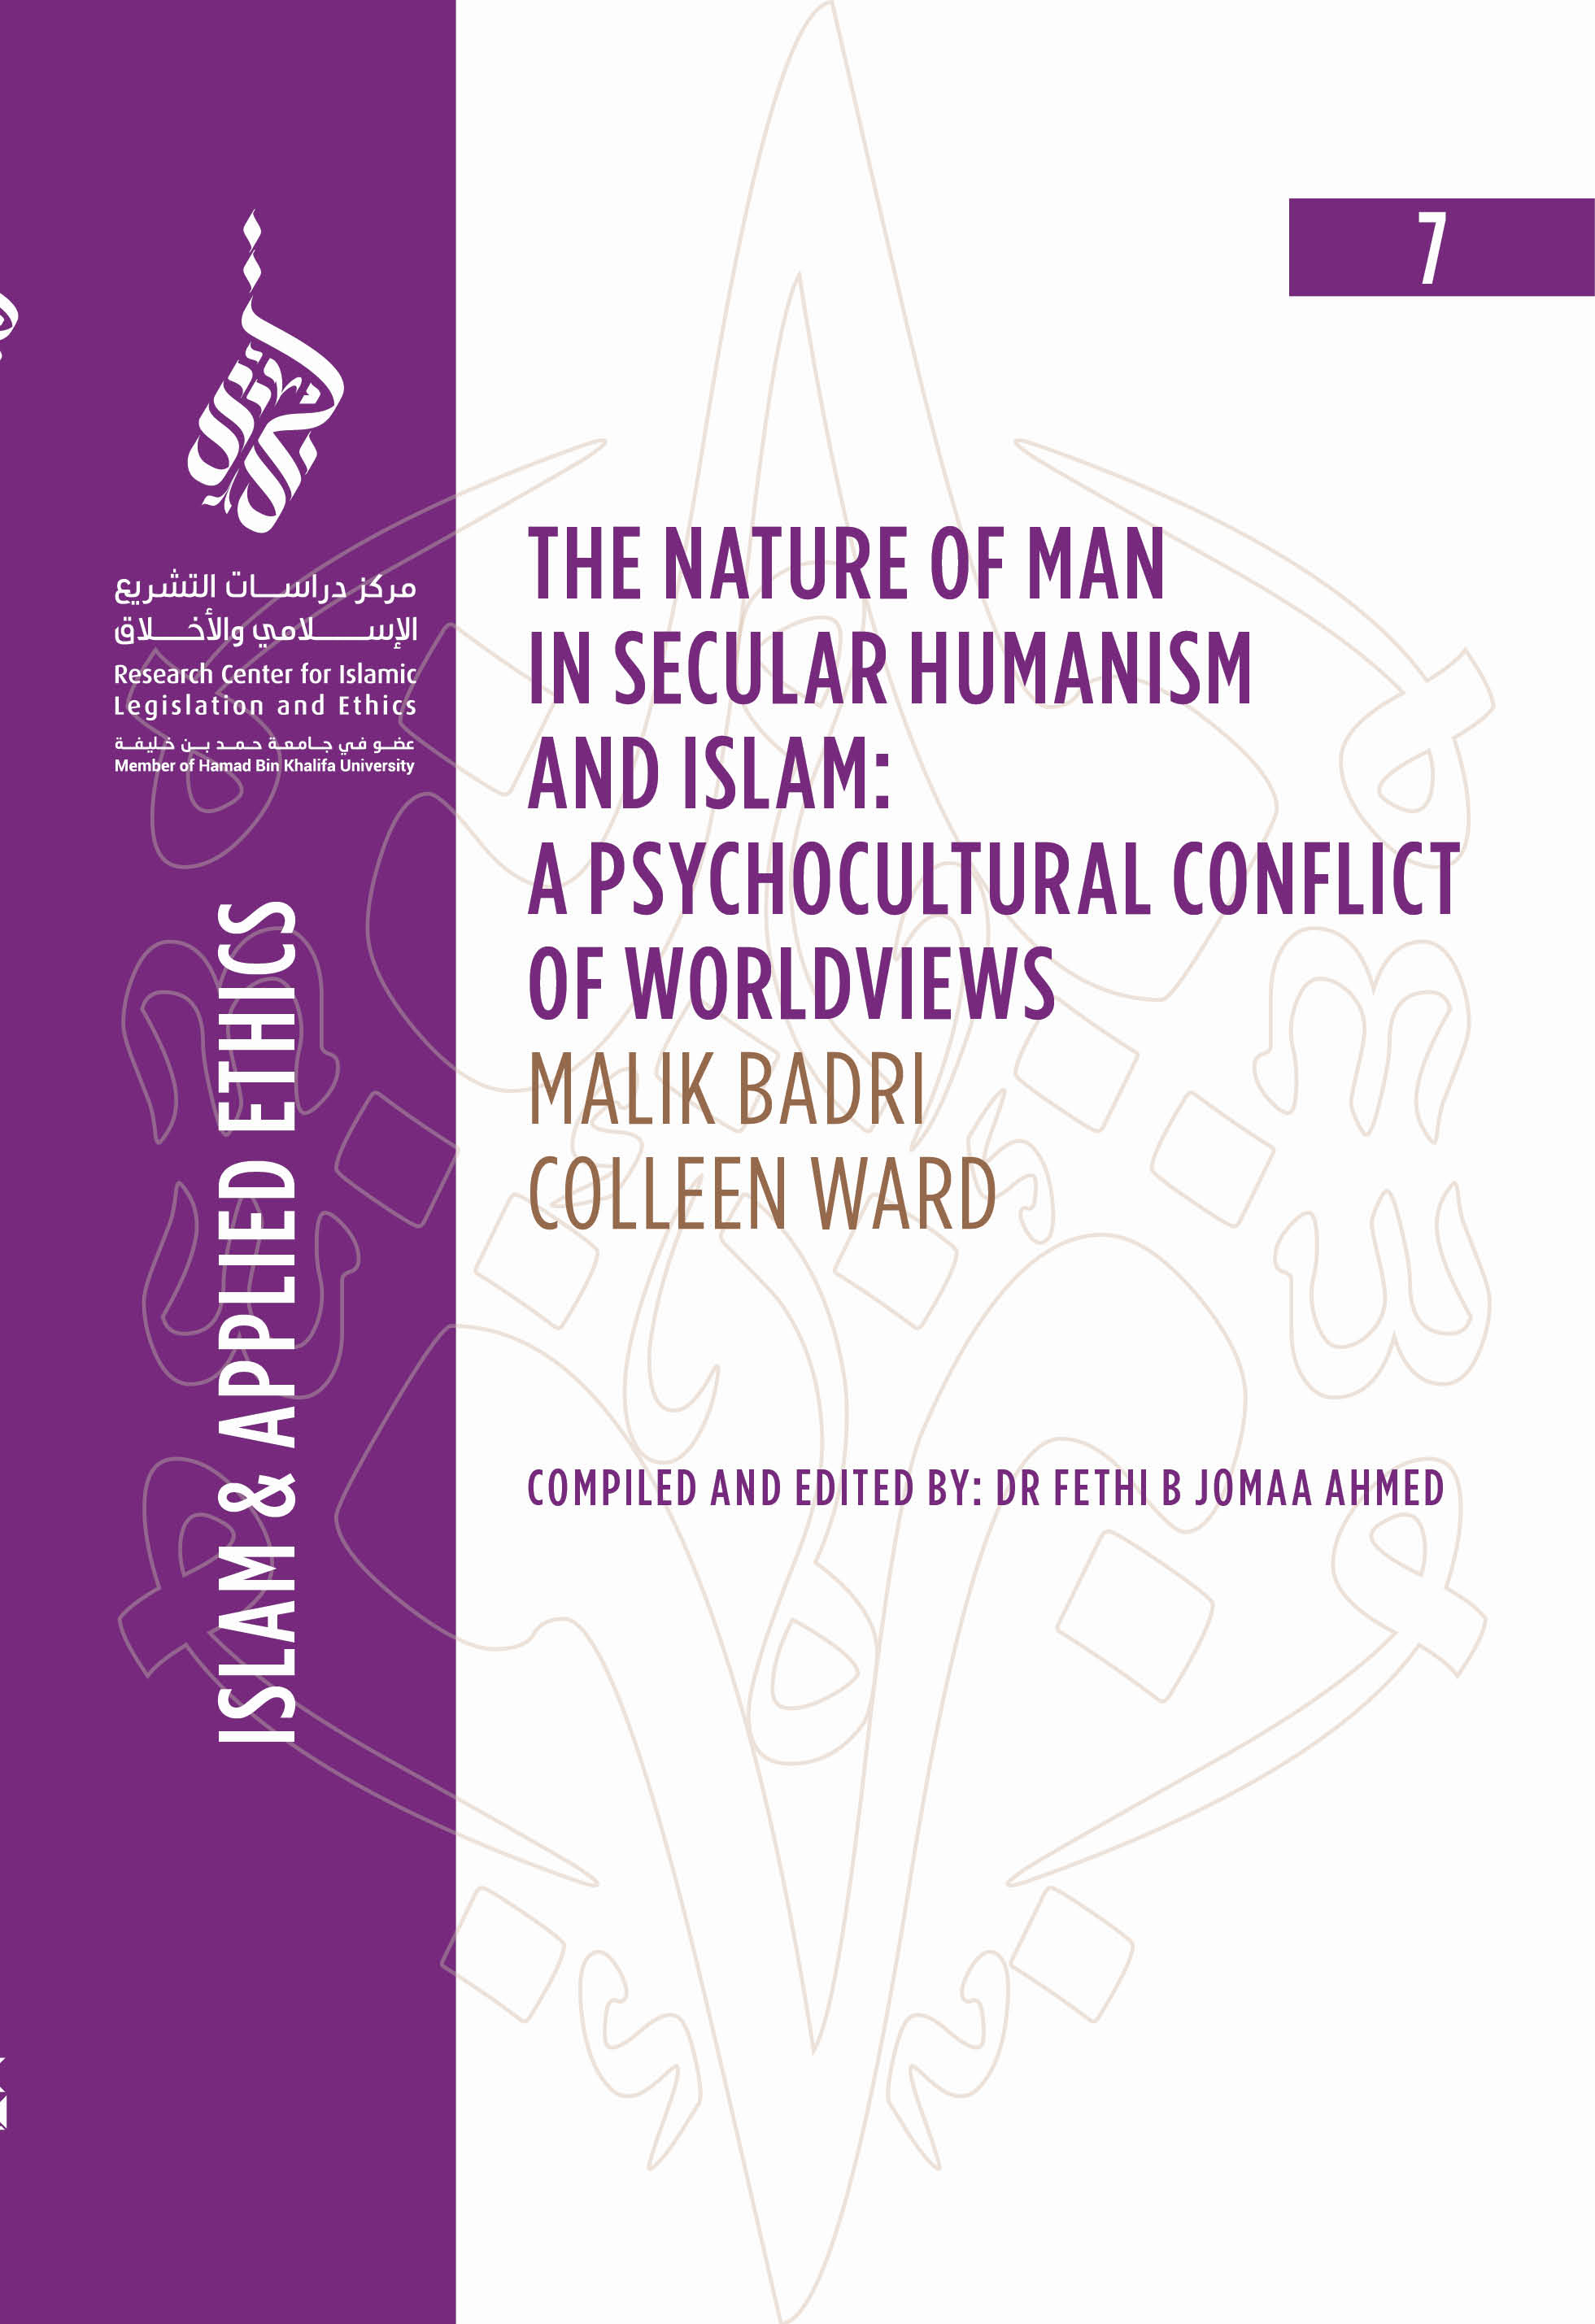 image of The Nature of Man in Secular Humanism and Islam: A Psychocultural Conflict of Worldviews